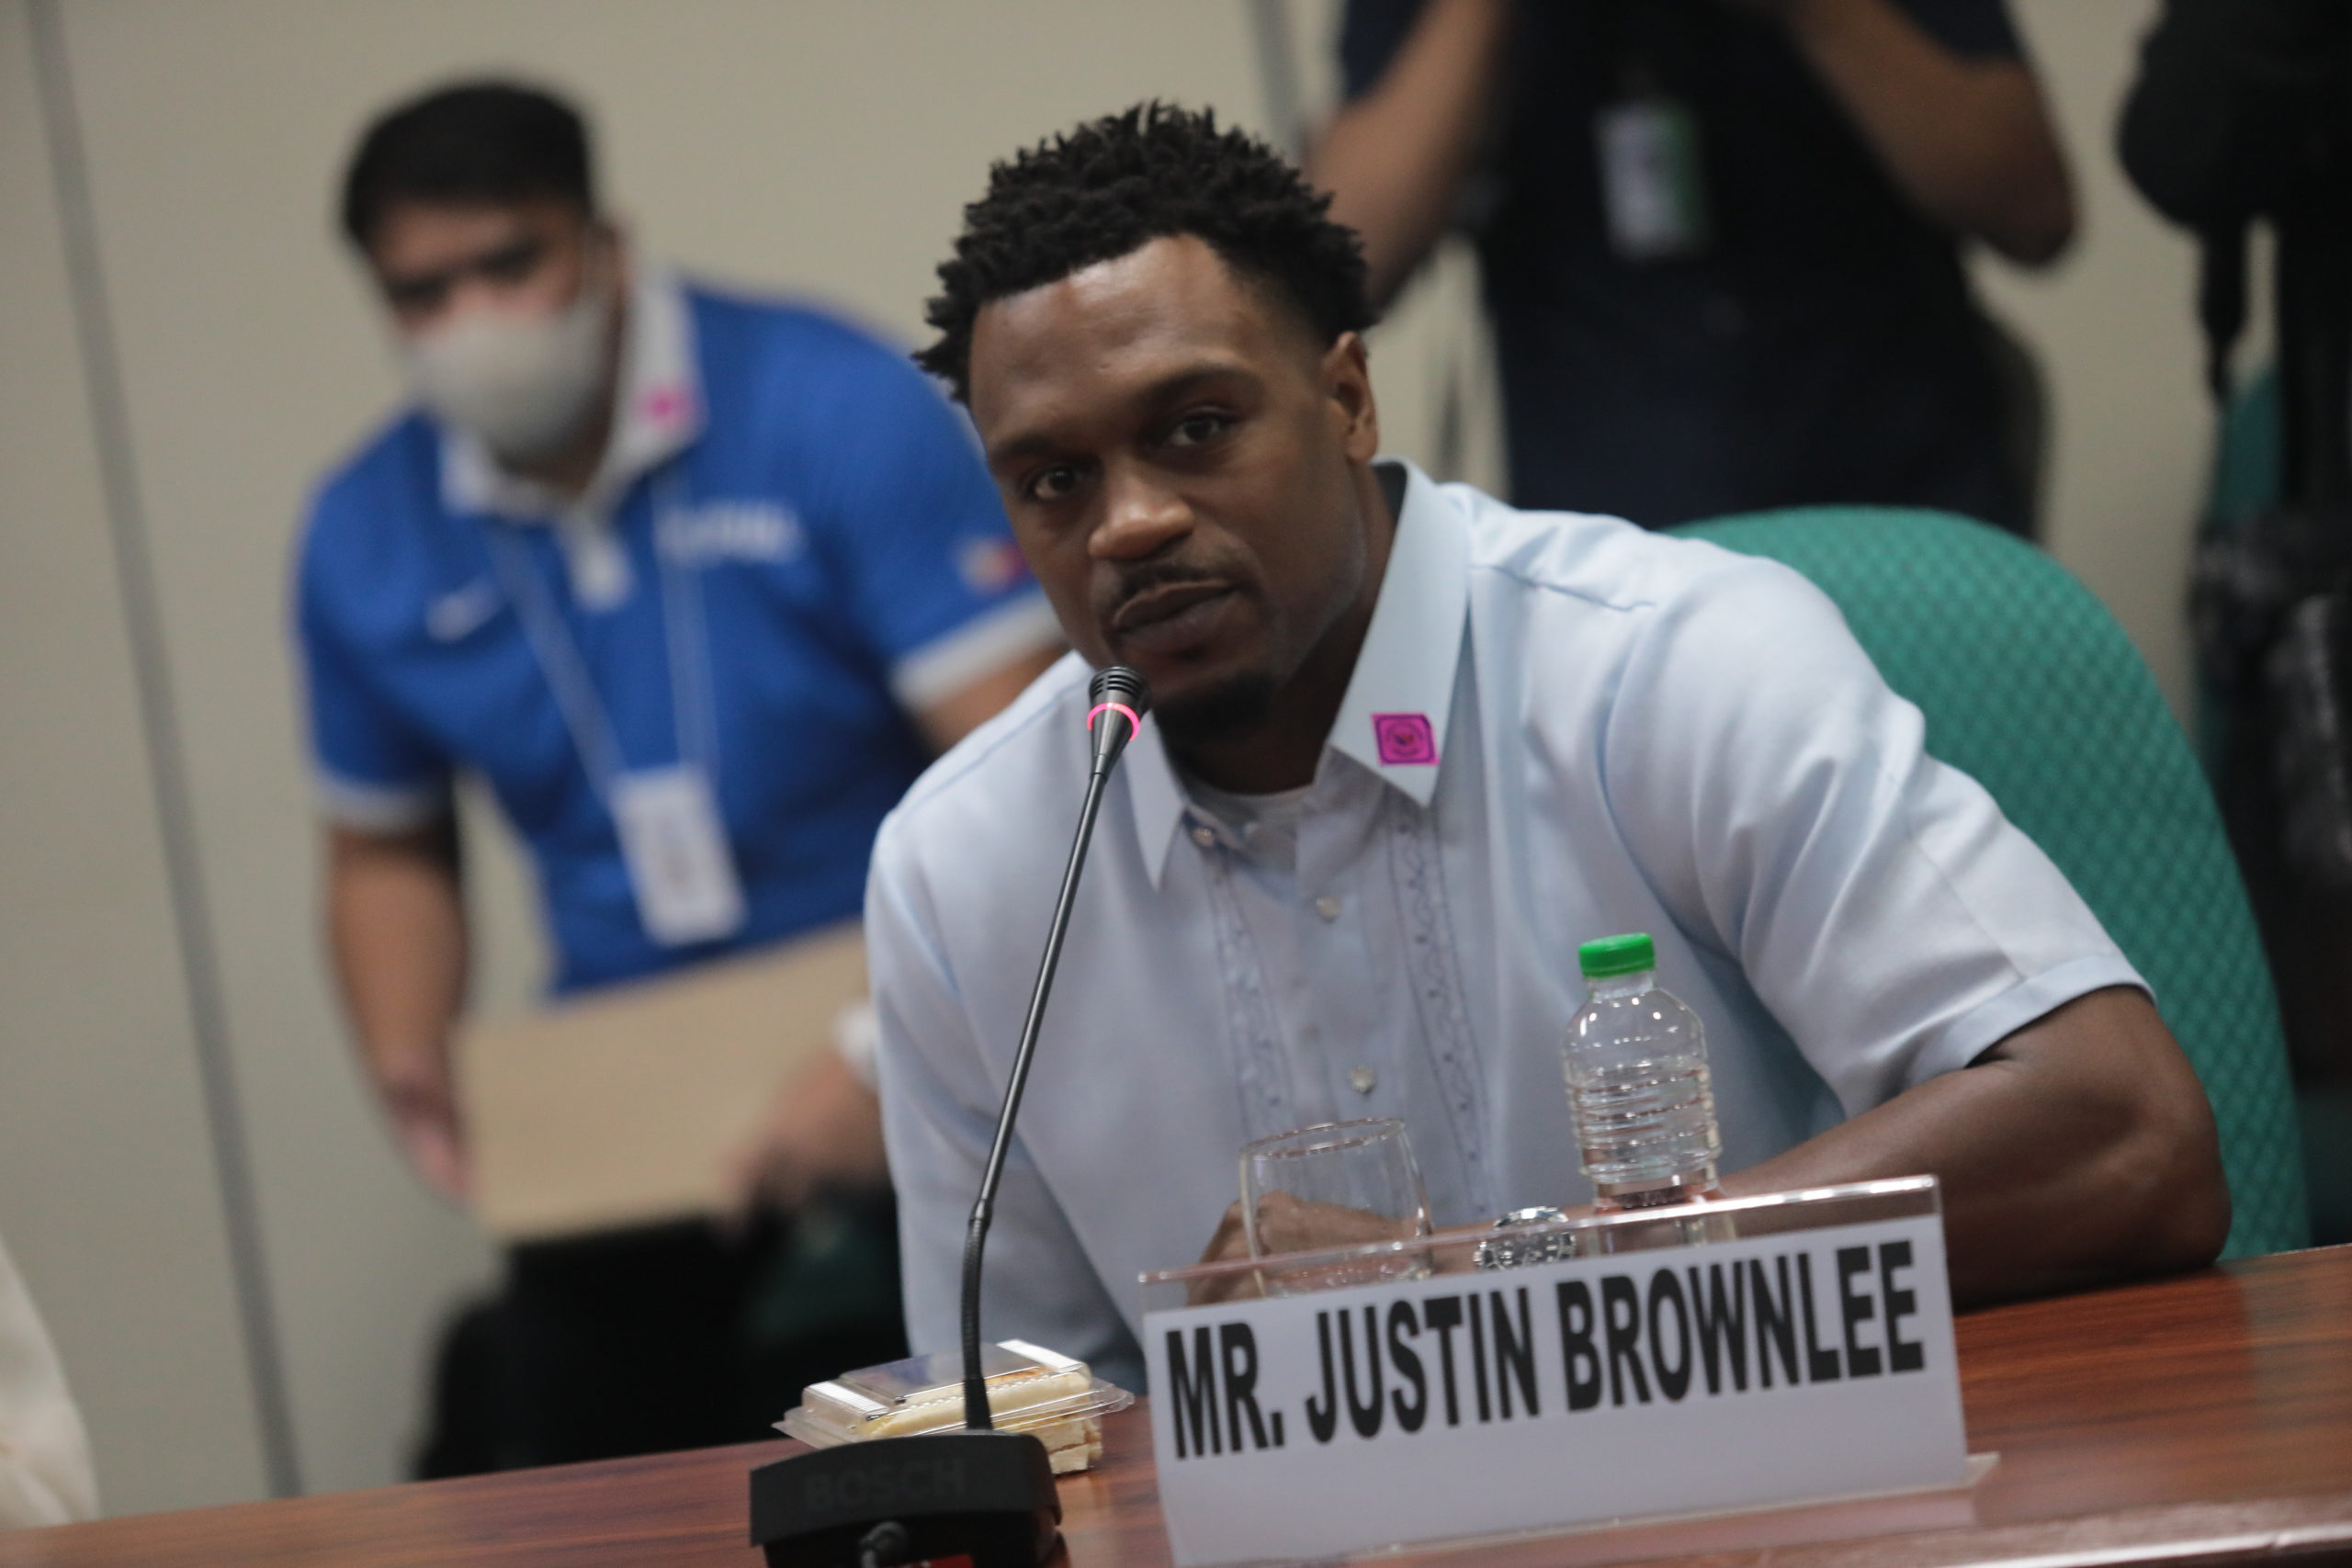 SENATE PANEL APPROVES BROWNLEE PH CITIZENSHIP: American basketball player Justin Brownlee’s naturalization to Philippine citizenship passes at the Committee on Justice and Human Rights level after less than two hours of deliberations on his qualifications Monday, November 21, 2022. Brownlee, wearing a Barong Tagalog, answered queries from senators, sometimes in Filipino. He has been in and out of the country for five years, playing as an import of Barangay Ginebra San Miguel and has earned Philippine Basketball Association’s best import award twice. Once his naturalization is approved, he is expected to reinforce the Gilas Pilipinas team in February in the FIBA World Cup Asian Qualifiers Window 6 to be held in Philippine Arena